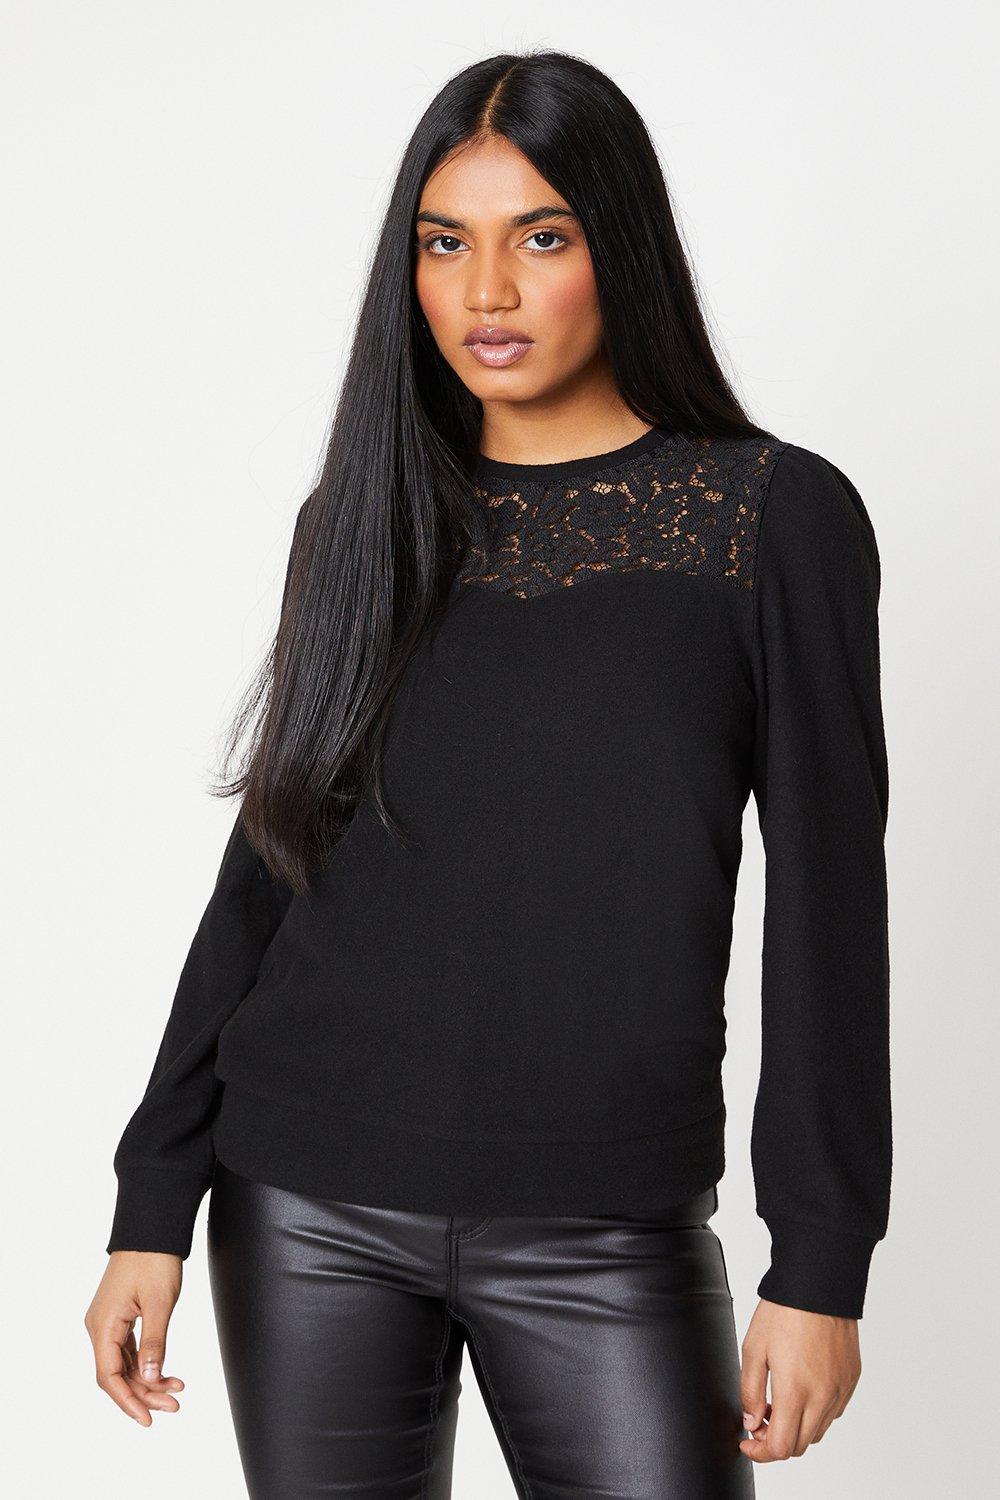 Women’s Petite Lace Insert Detail Brushed Long Sleeve Top - black - S